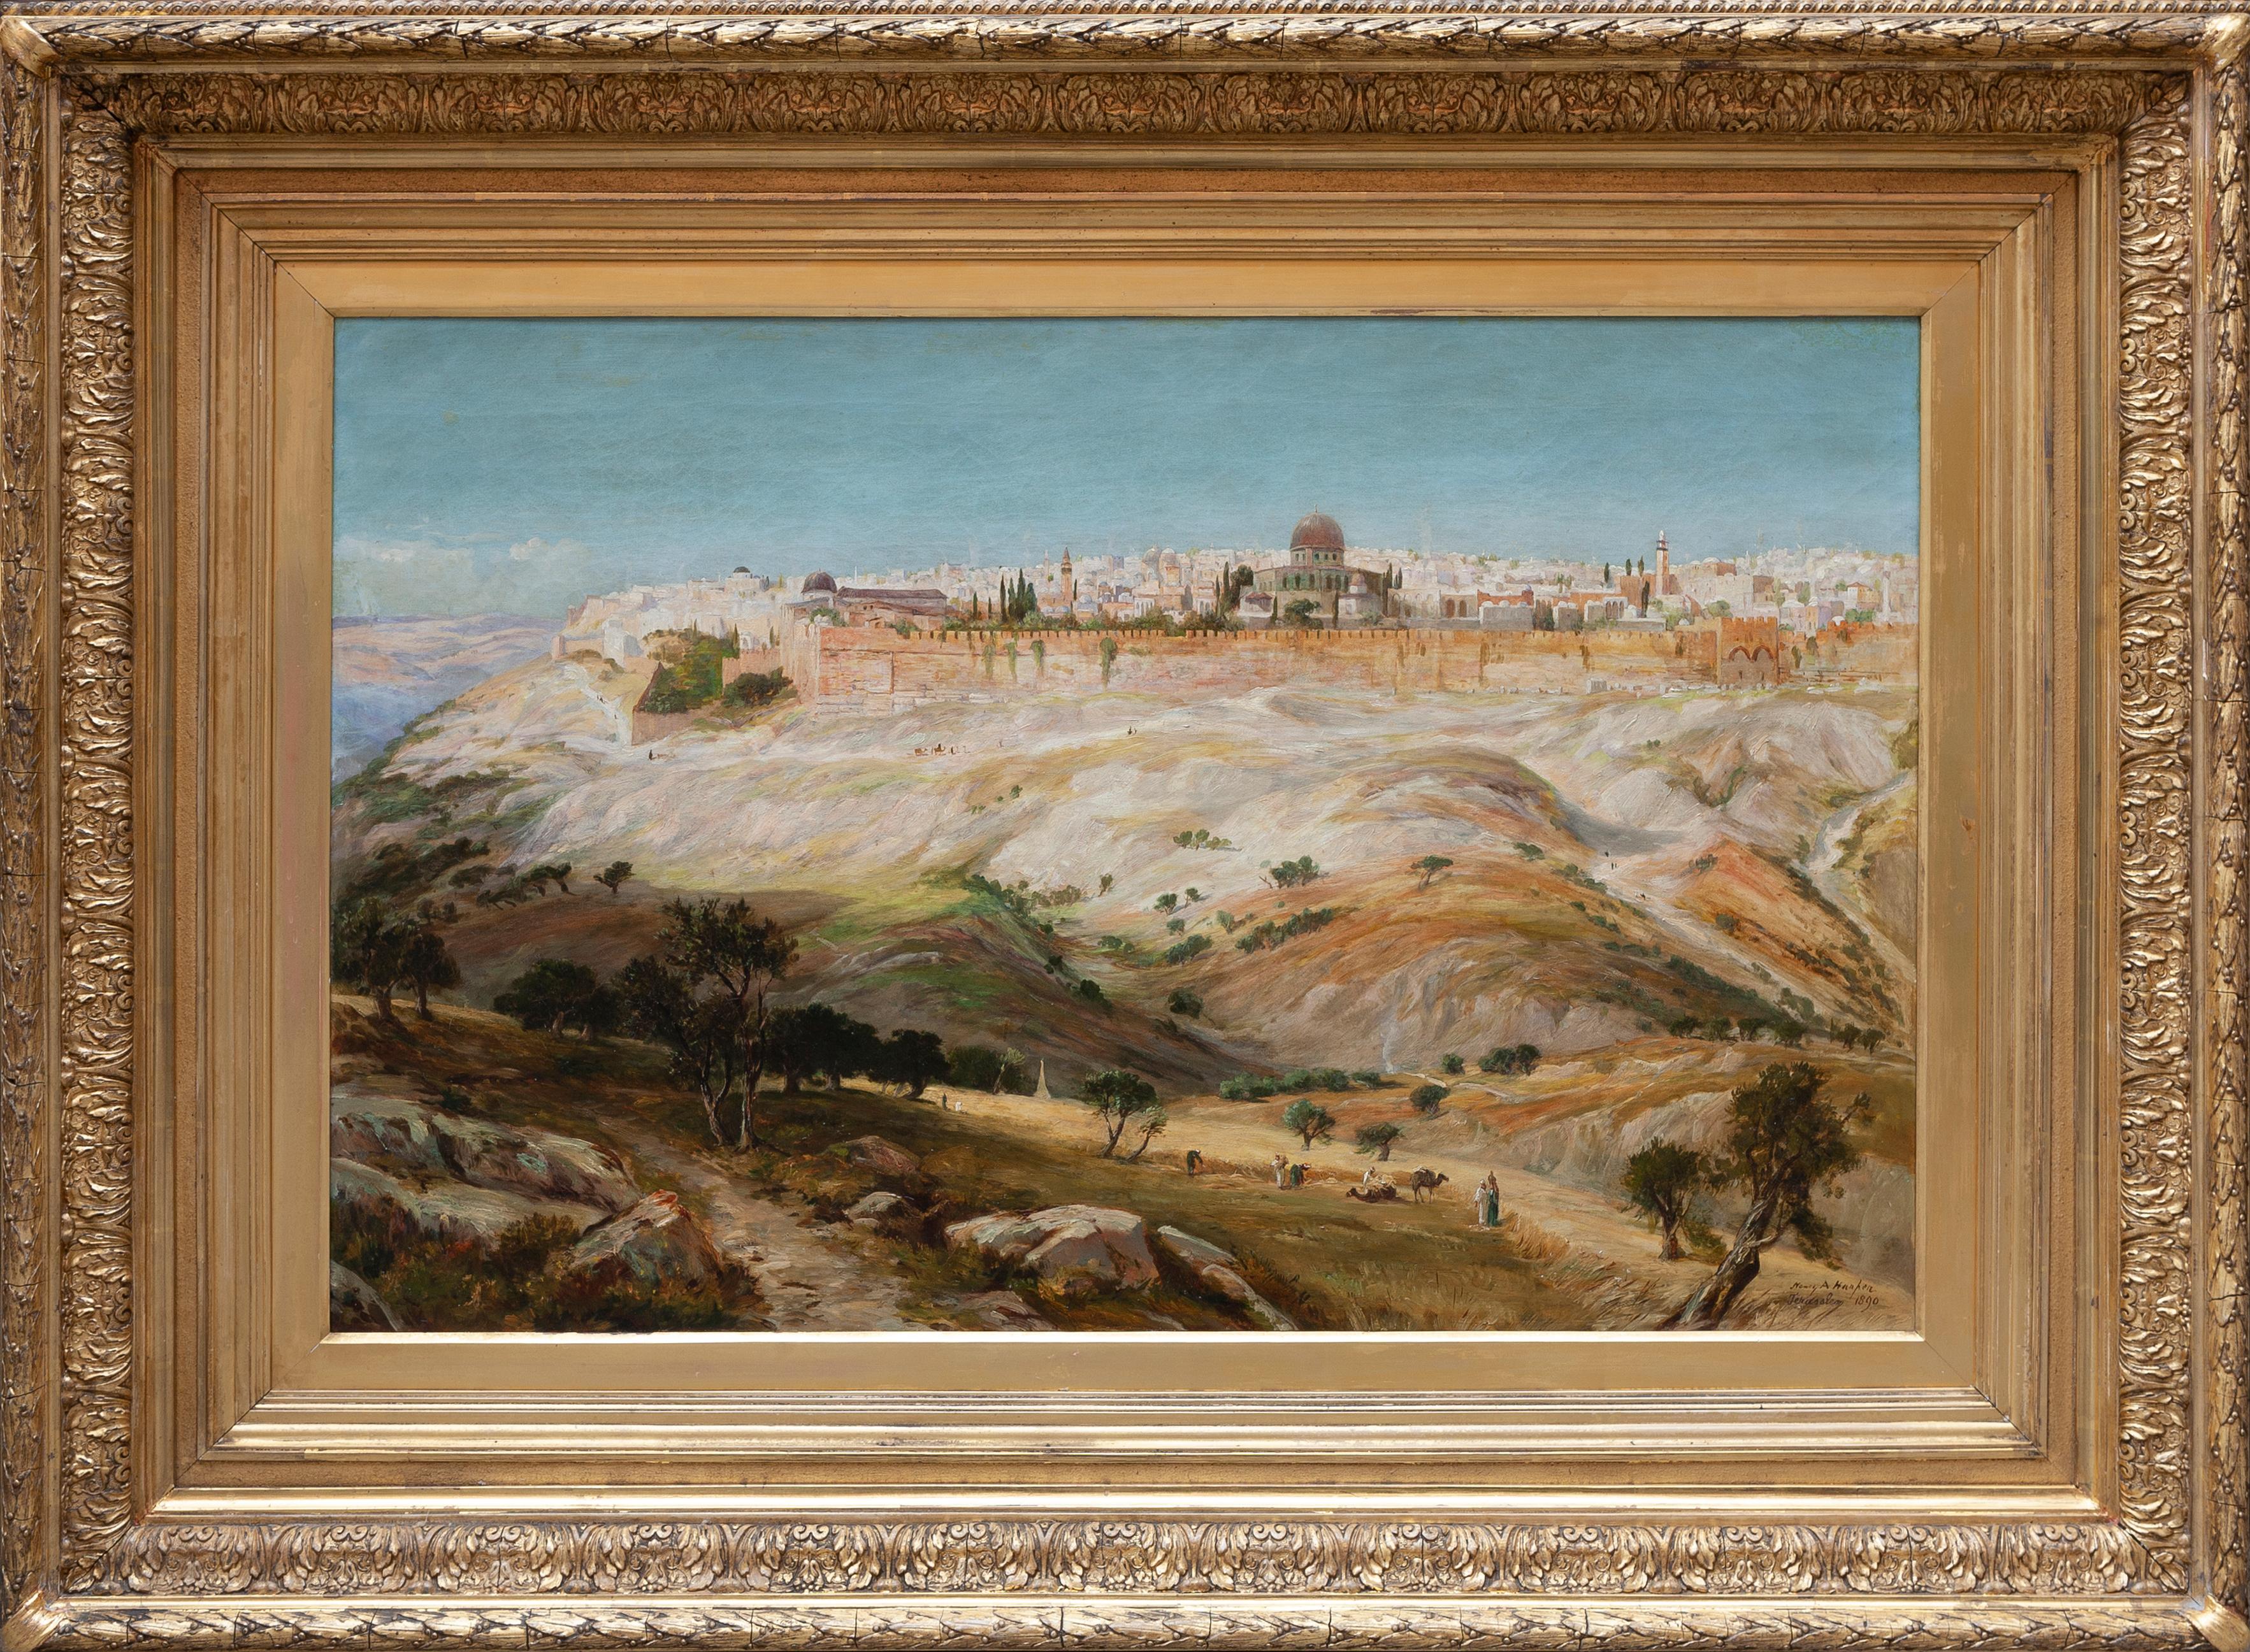 Henry Andrew Harper (Blunham, 1835 - London, 1900) Landscape Painting - View of Jerusalem from the Mount of Olives, 1890